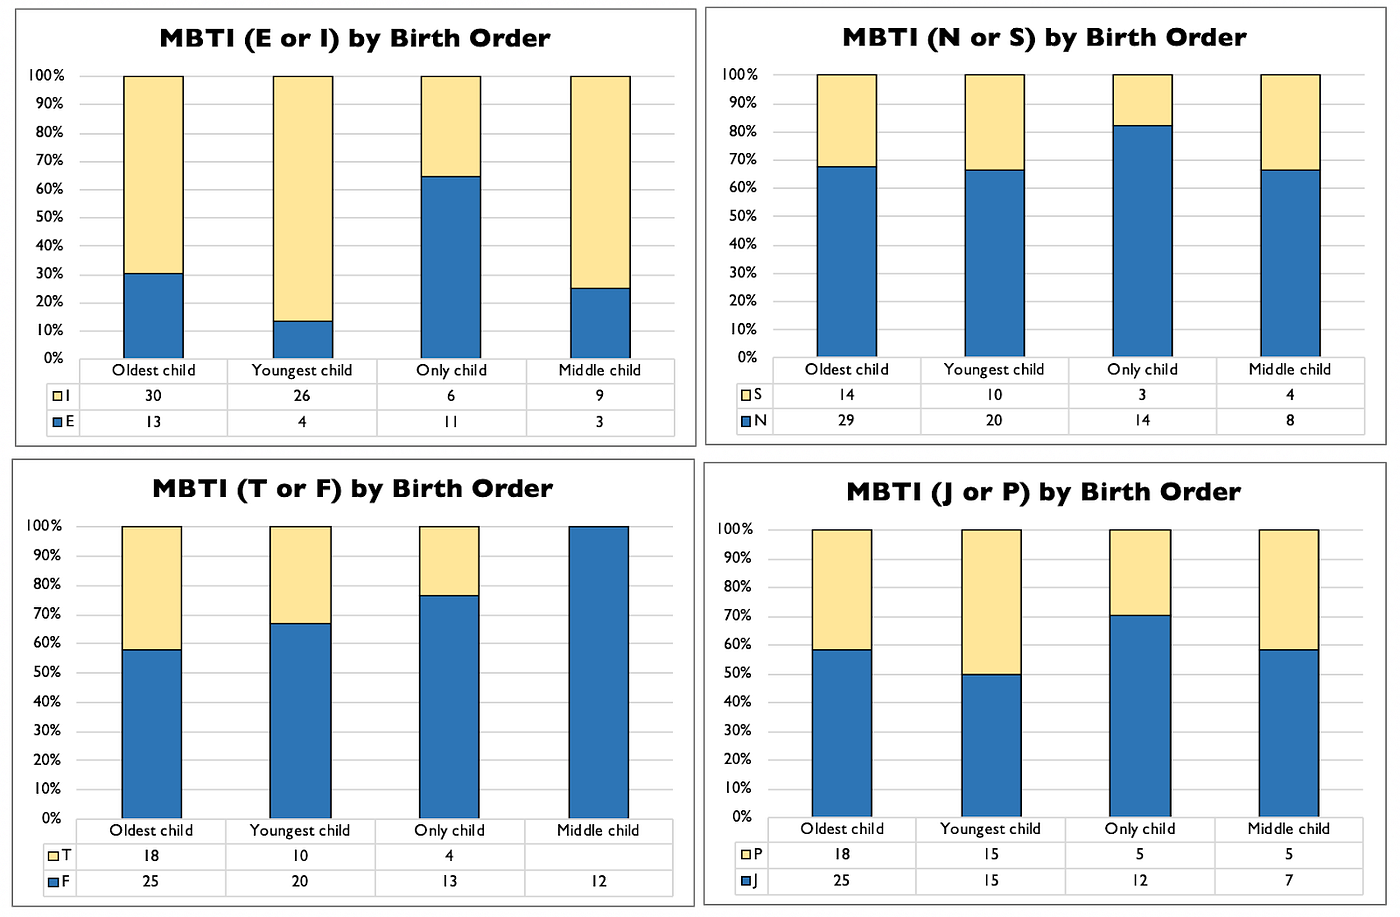 Are there any correlations between birth order and MBTI? If so, what are  they? - Quora